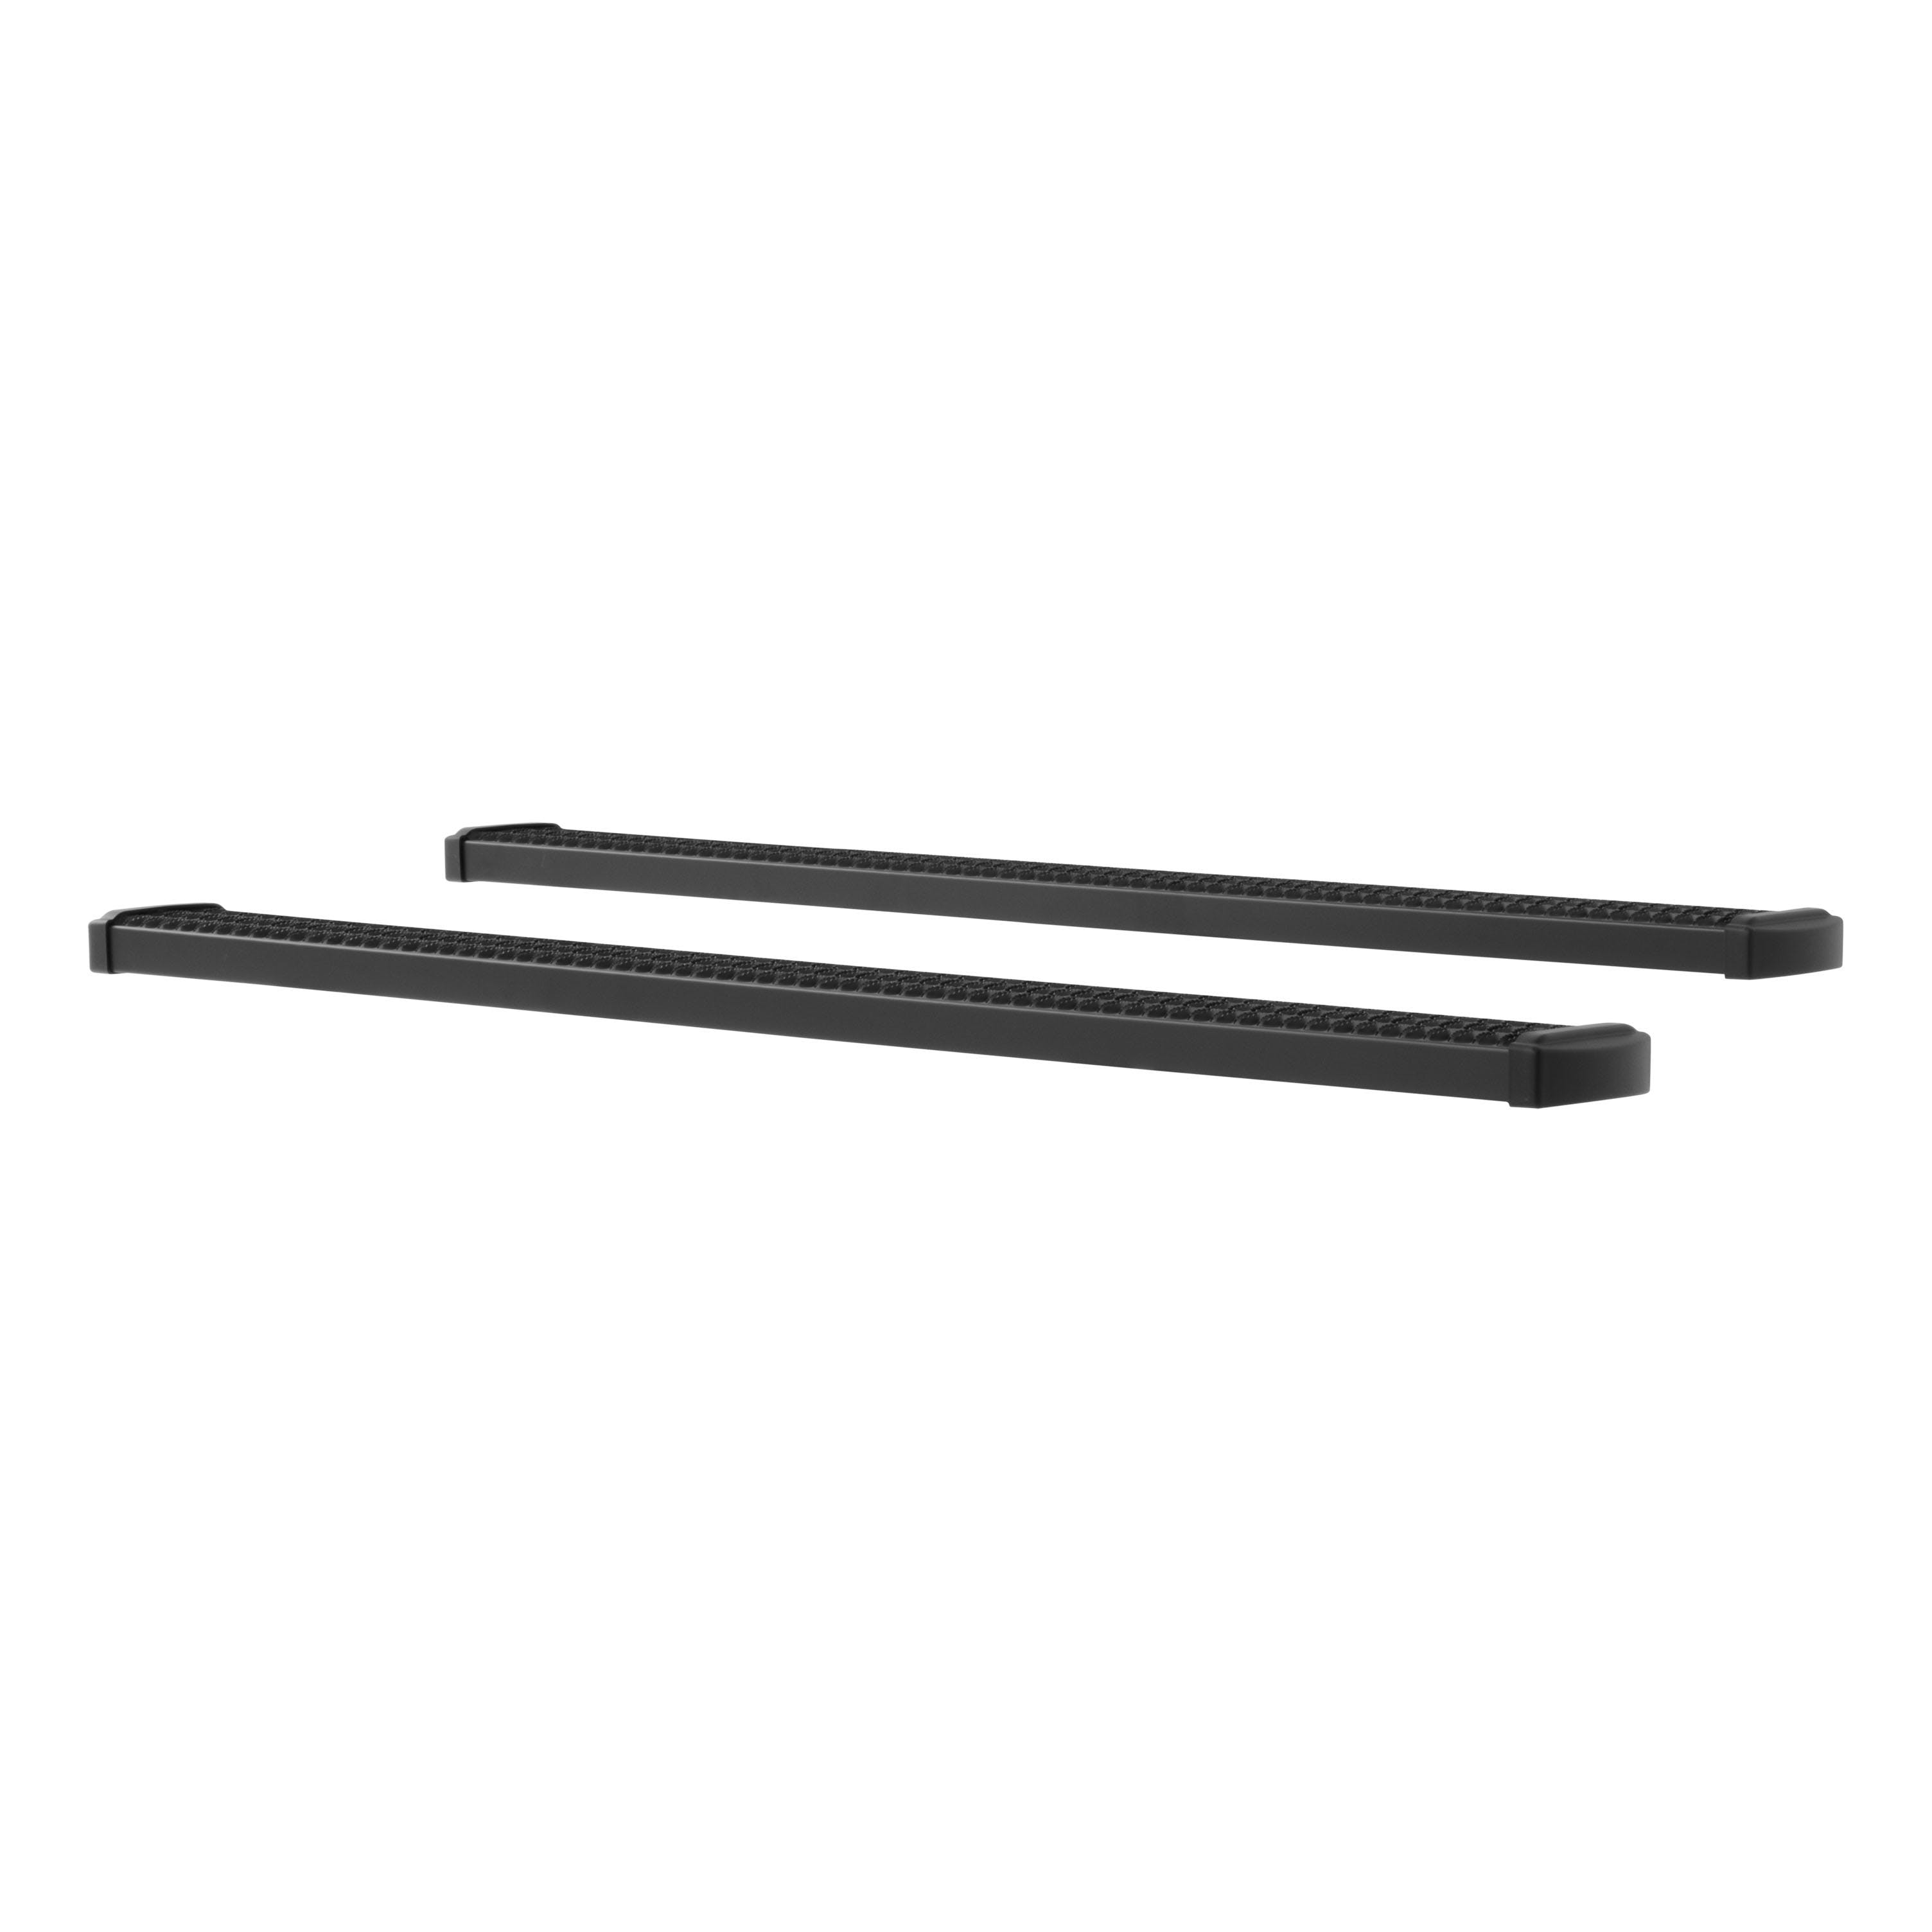 LUVERNE 415078-400713 Grip Step 7 inch Running Boards